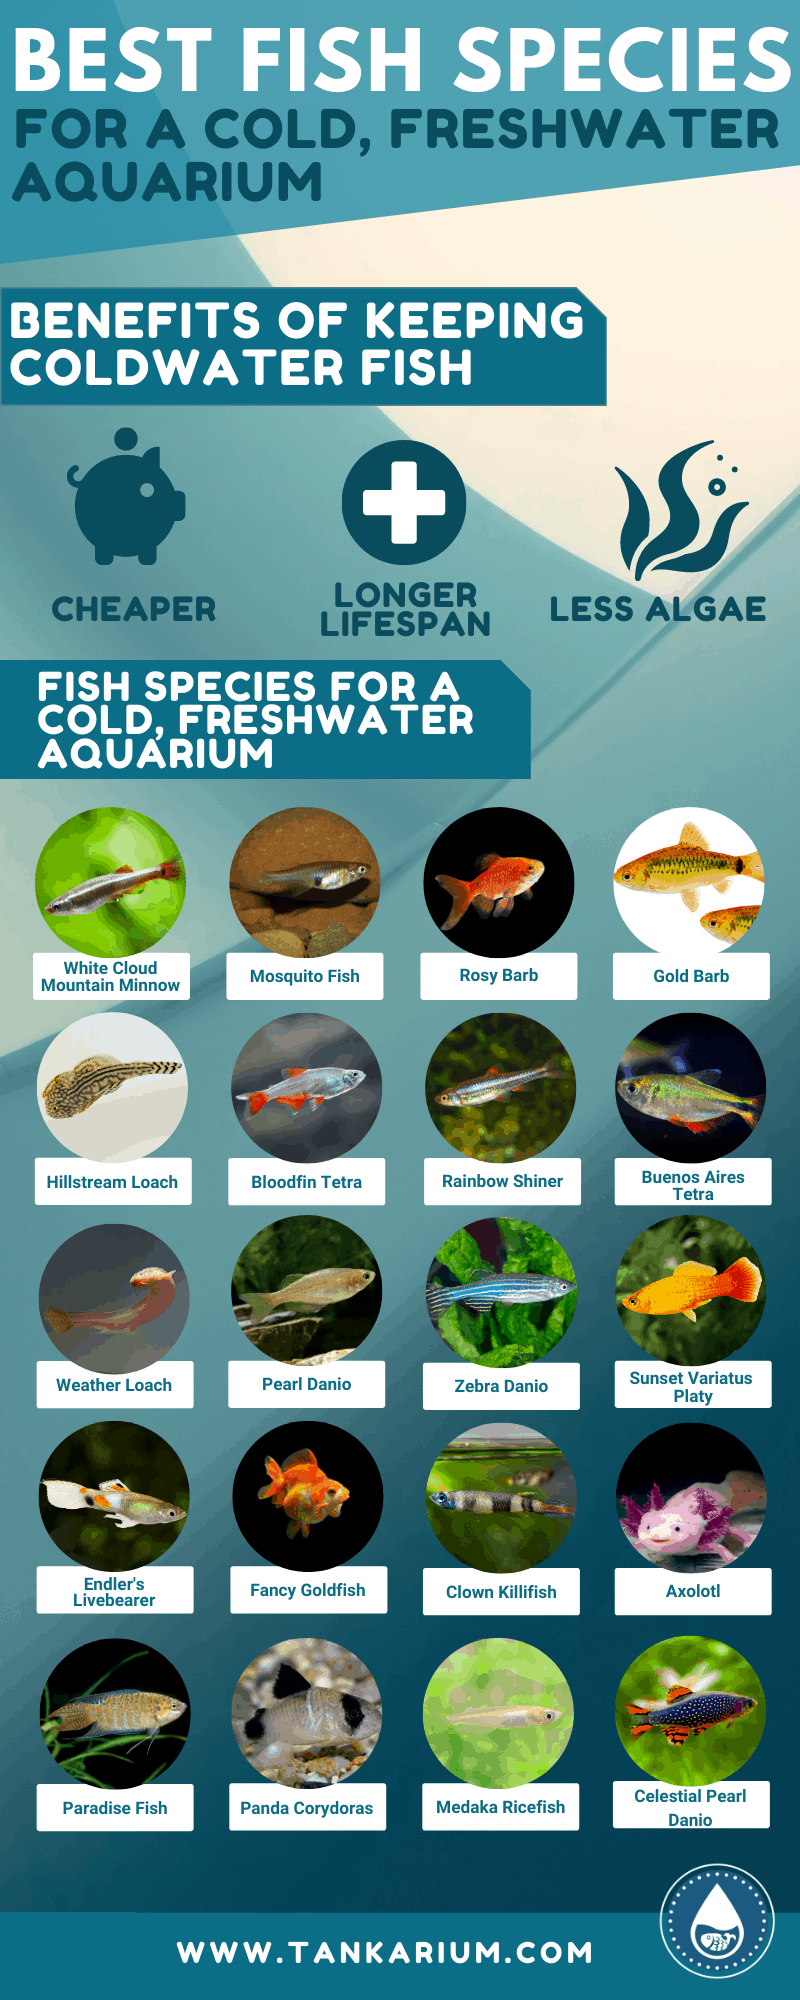 Best Fish Species For A Cold, Freshwater Aquarium - Infographic